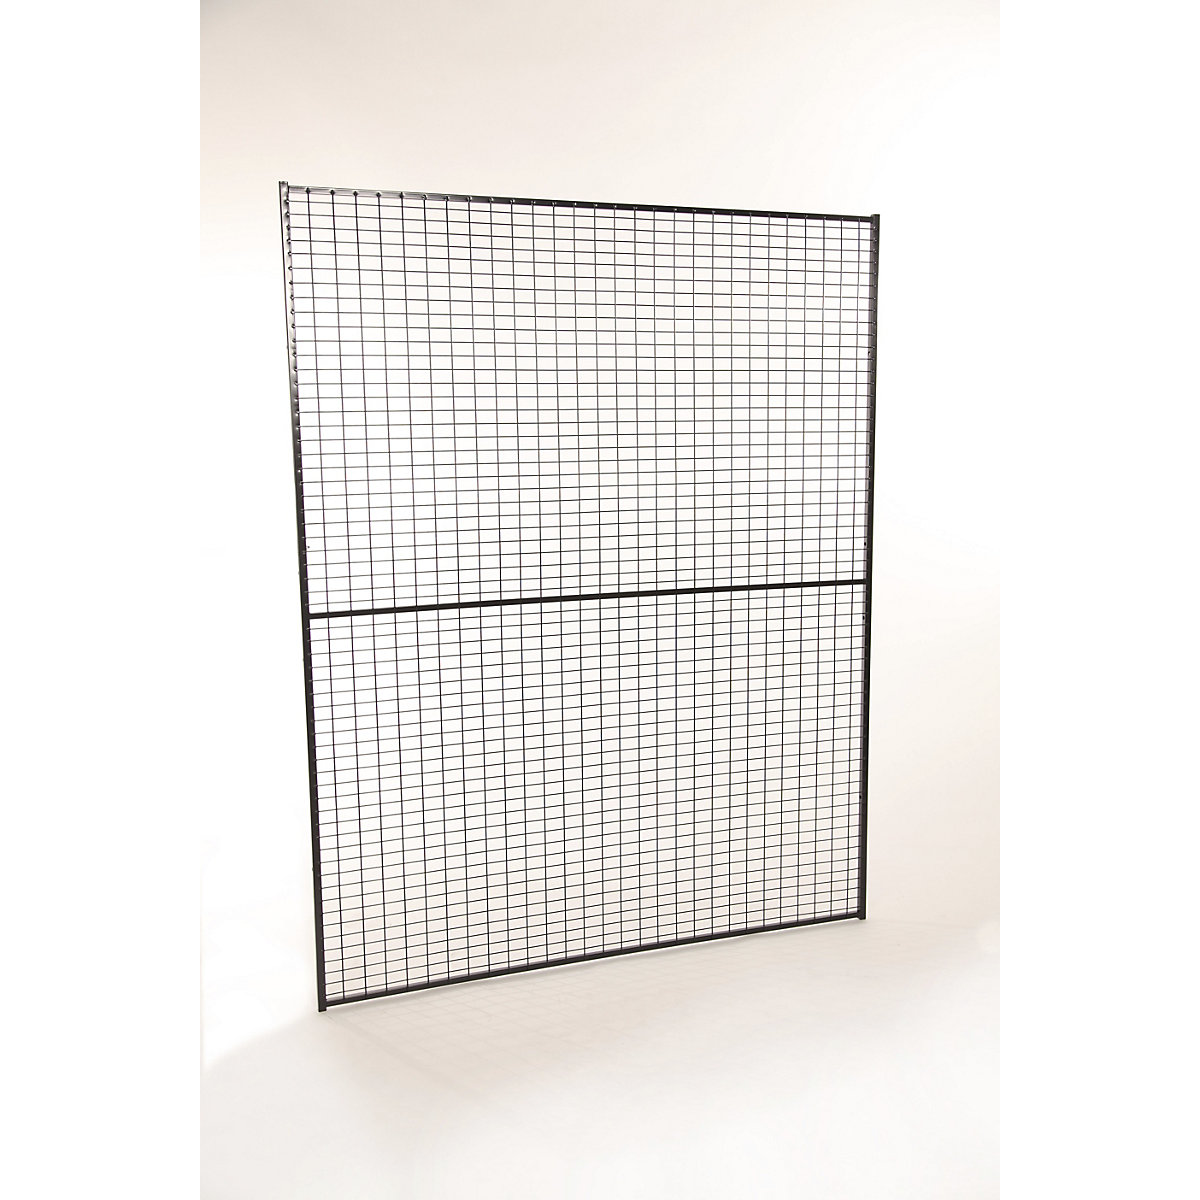 X-GUARD LITE machine protective fencing, wall section – Axelent, height 2200 mm, width 1400 mm-11